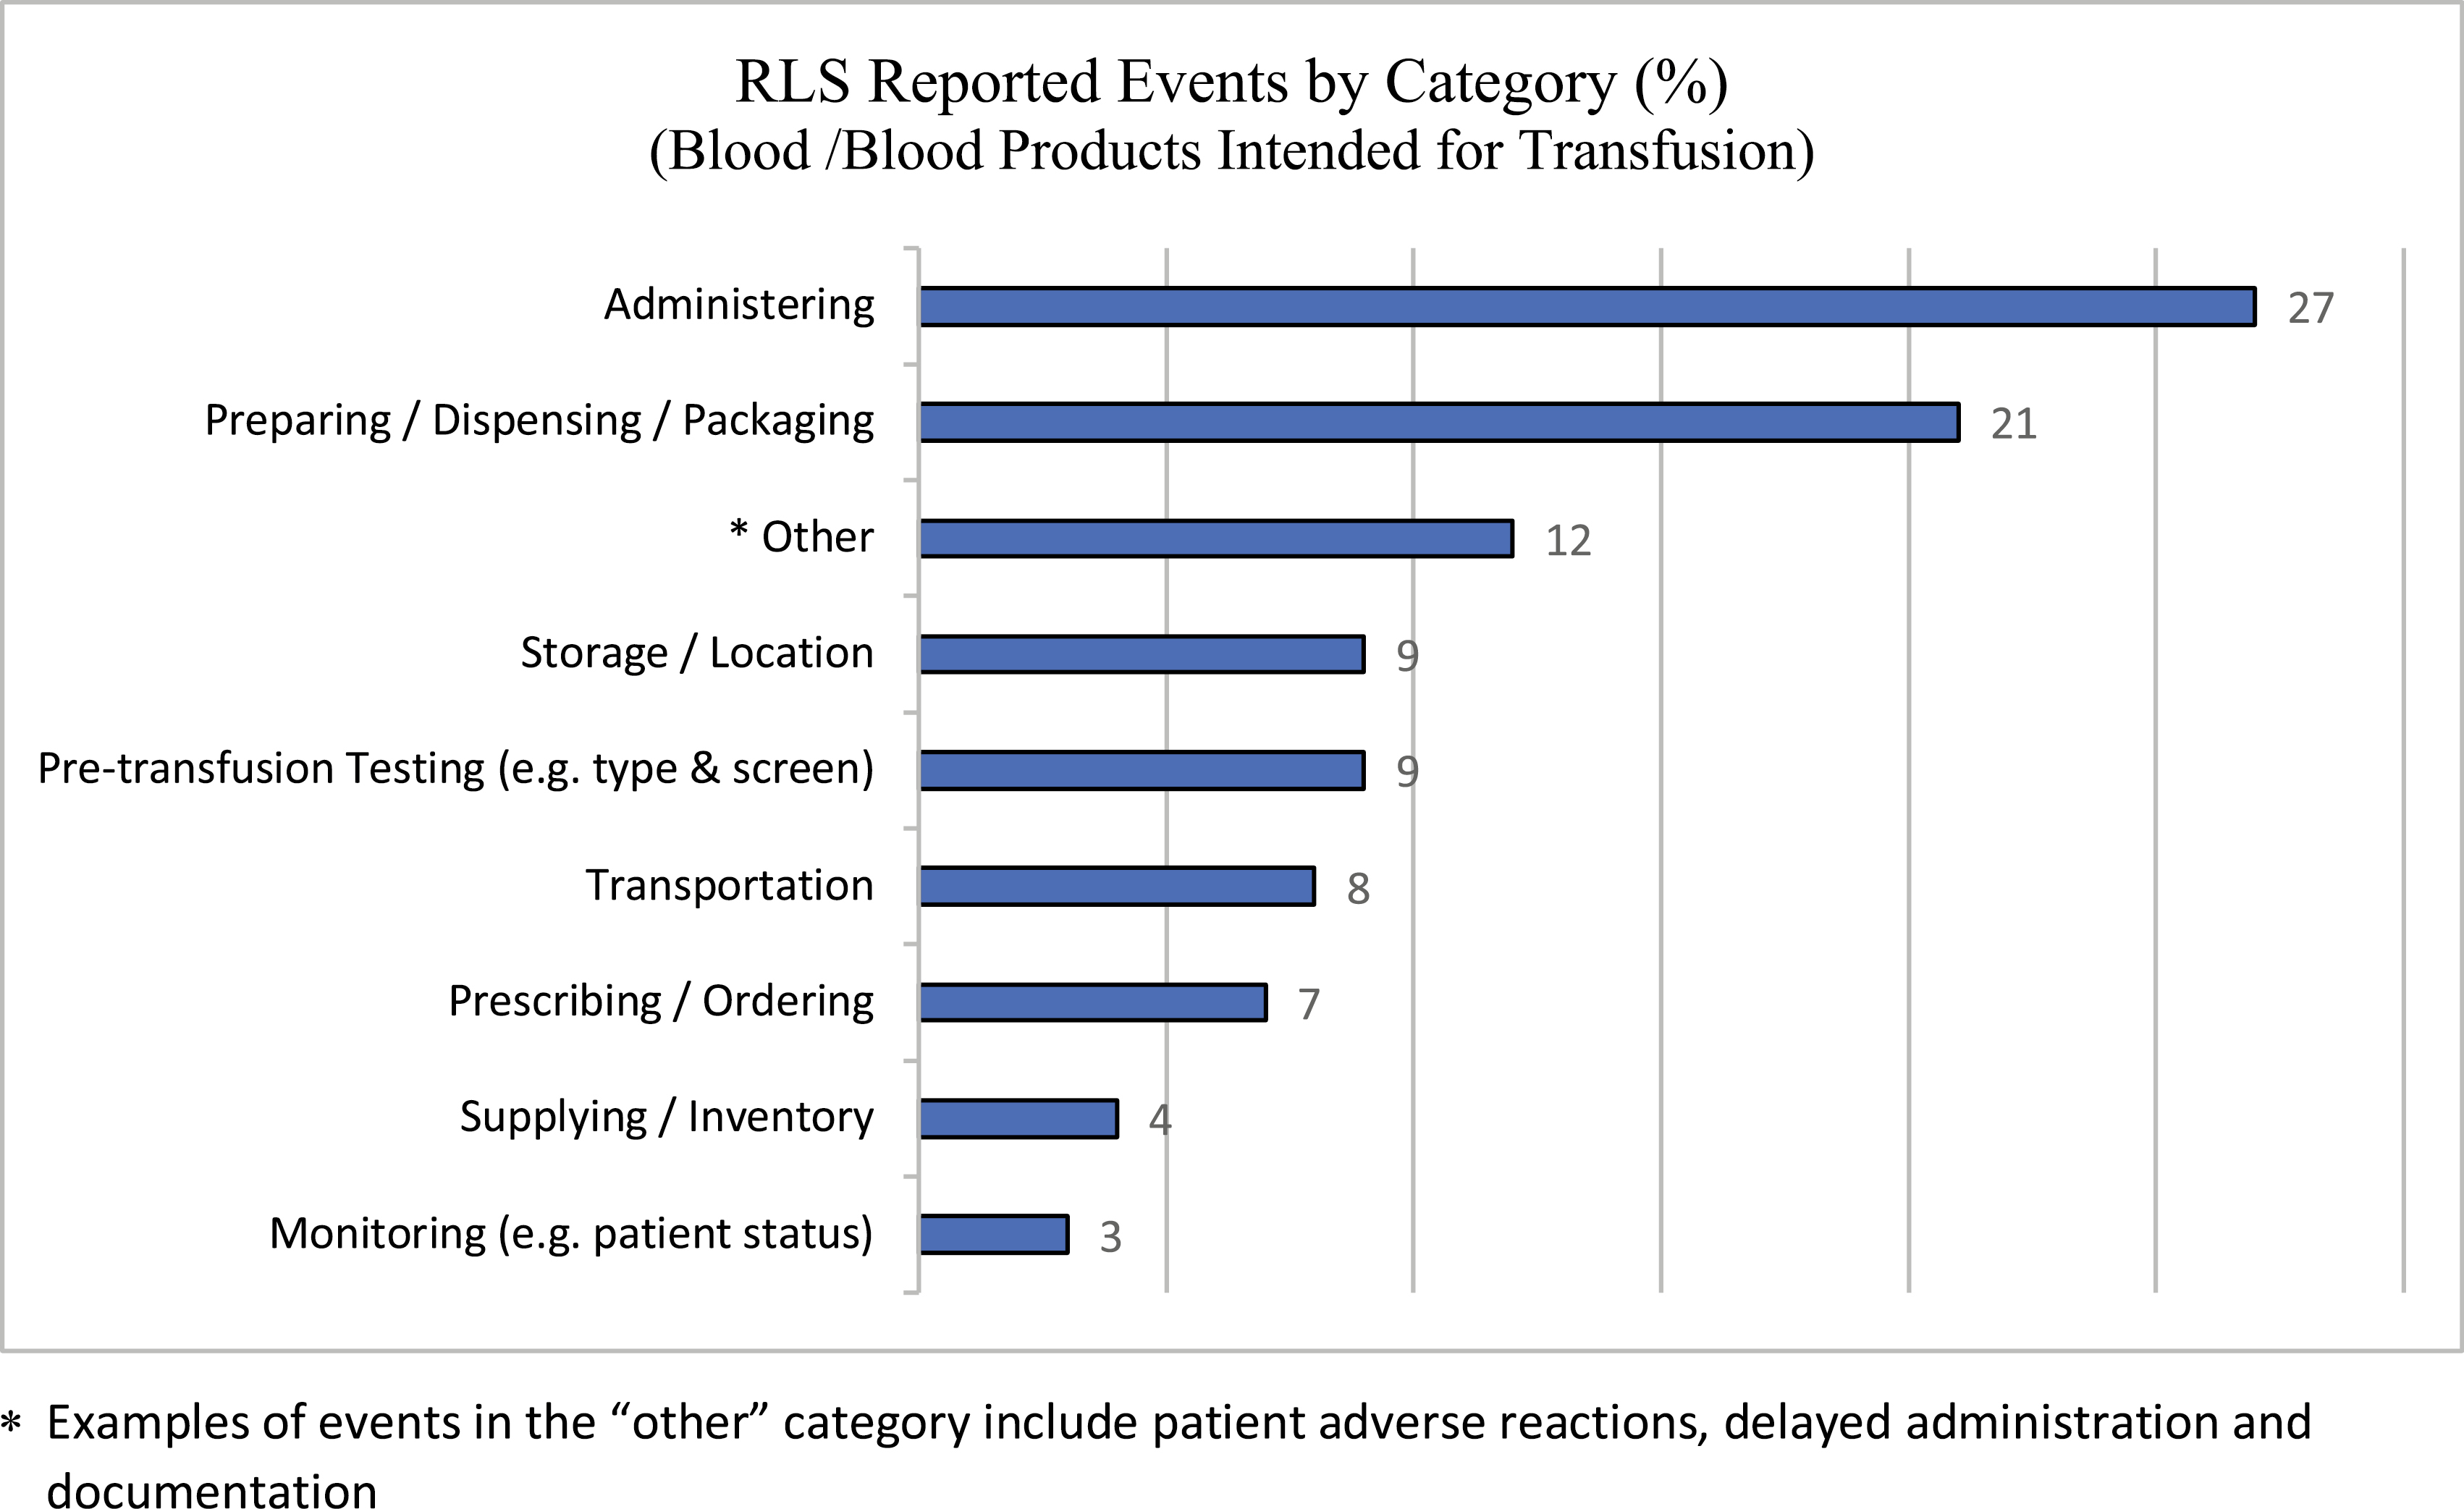 Blood/blood products intended for transfusion: voluntary RLS reports by category. *Examples of events in the ‘other’ category include patient adverse reactions, delayed administration and documentation.